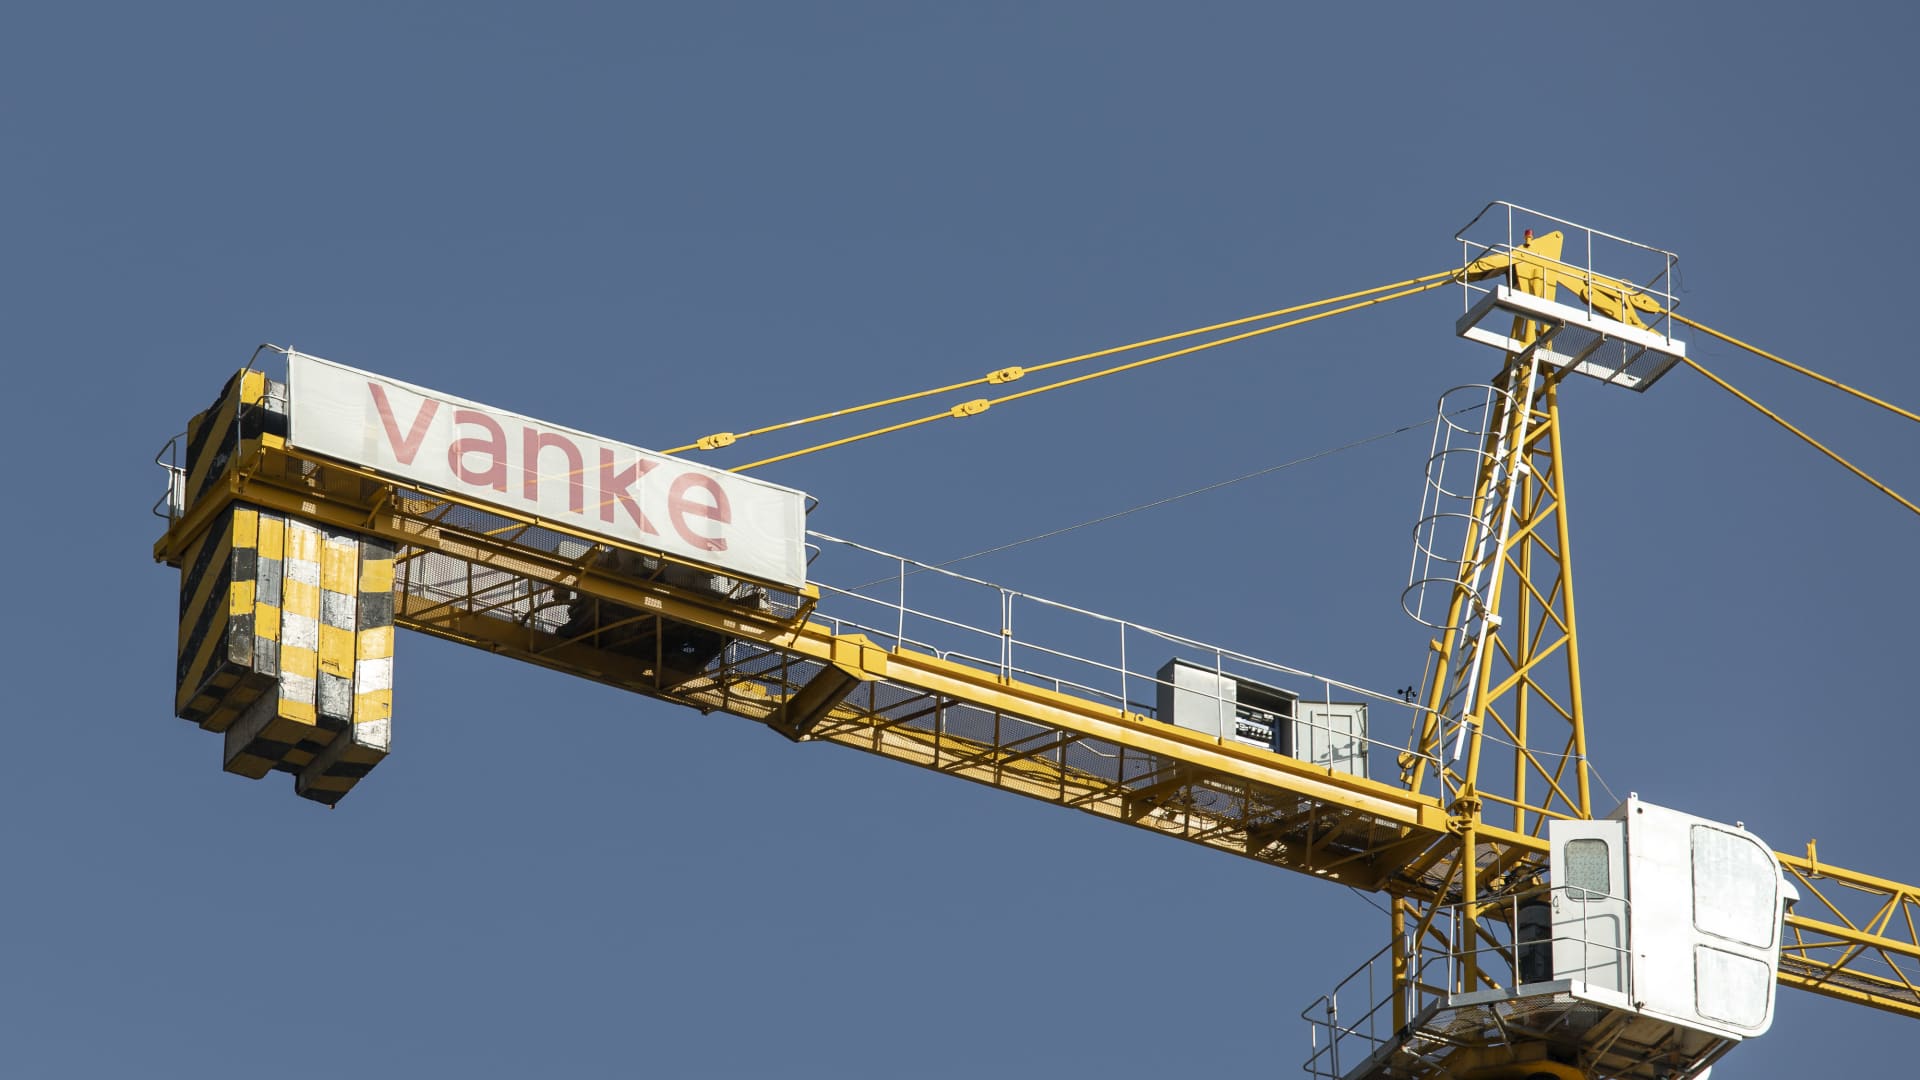 A crane with the China Vanke logo at a residential construction site in China, on Sept. 28, 2021.